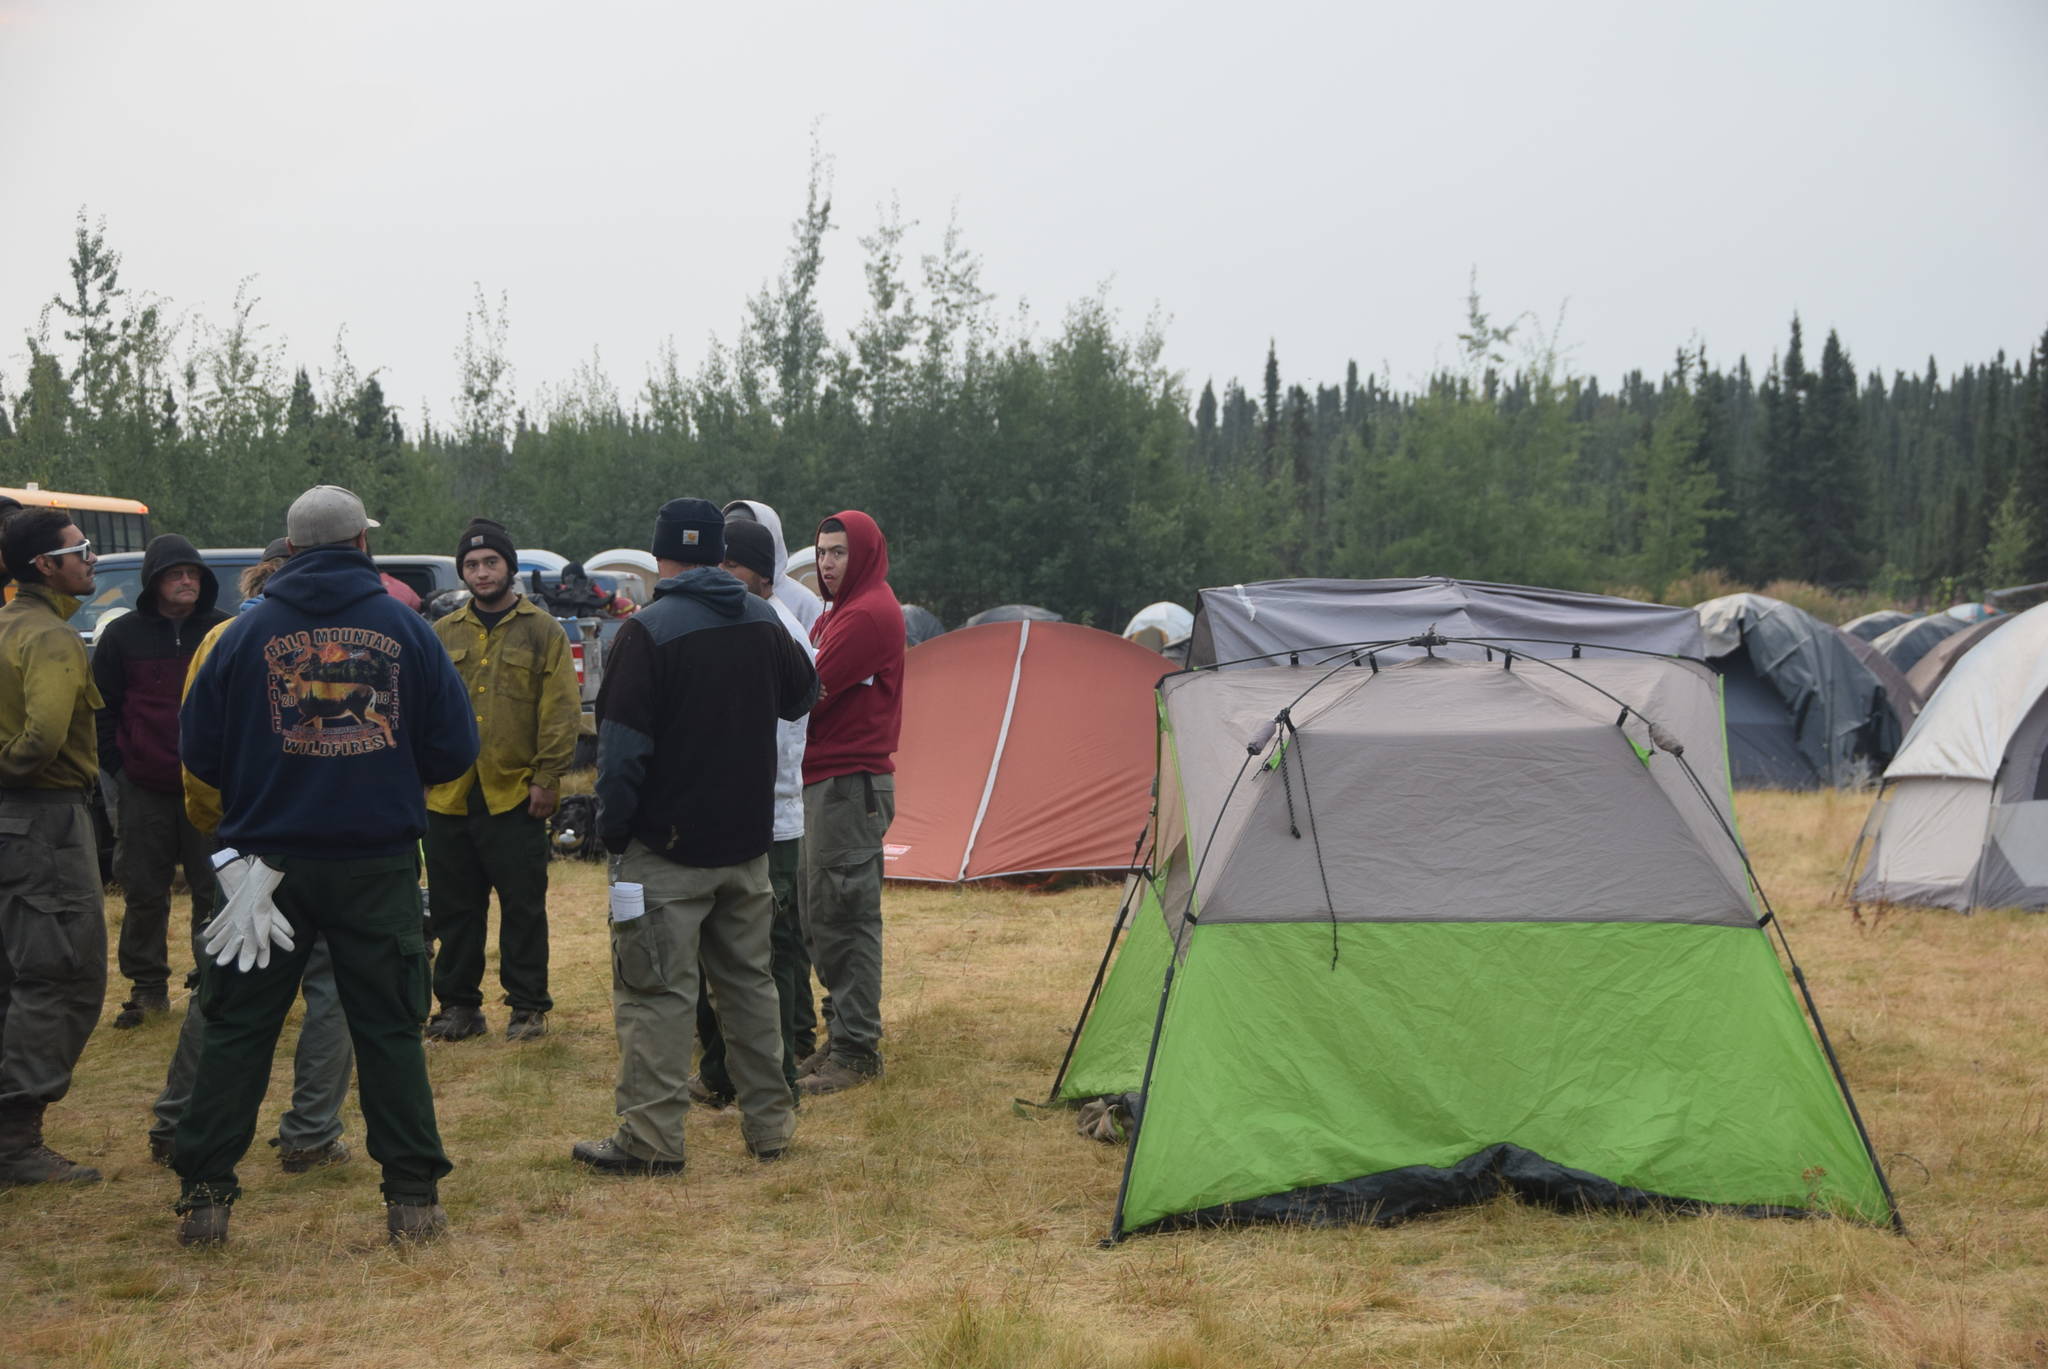 Firefighters discuss the day’s operations during their “division breakout” meeting at the Otter Creek Spike Camp 5 miles north of Sterling, Alaska on Aug. 30, 2019. After the general morning briefing, firefighters meet with their division supervisor to discuss more specifics for the area of the fire to which they are assigned, which is known as a division breakout. (Photo by Brian Mazurek/Peninsula Clarion)